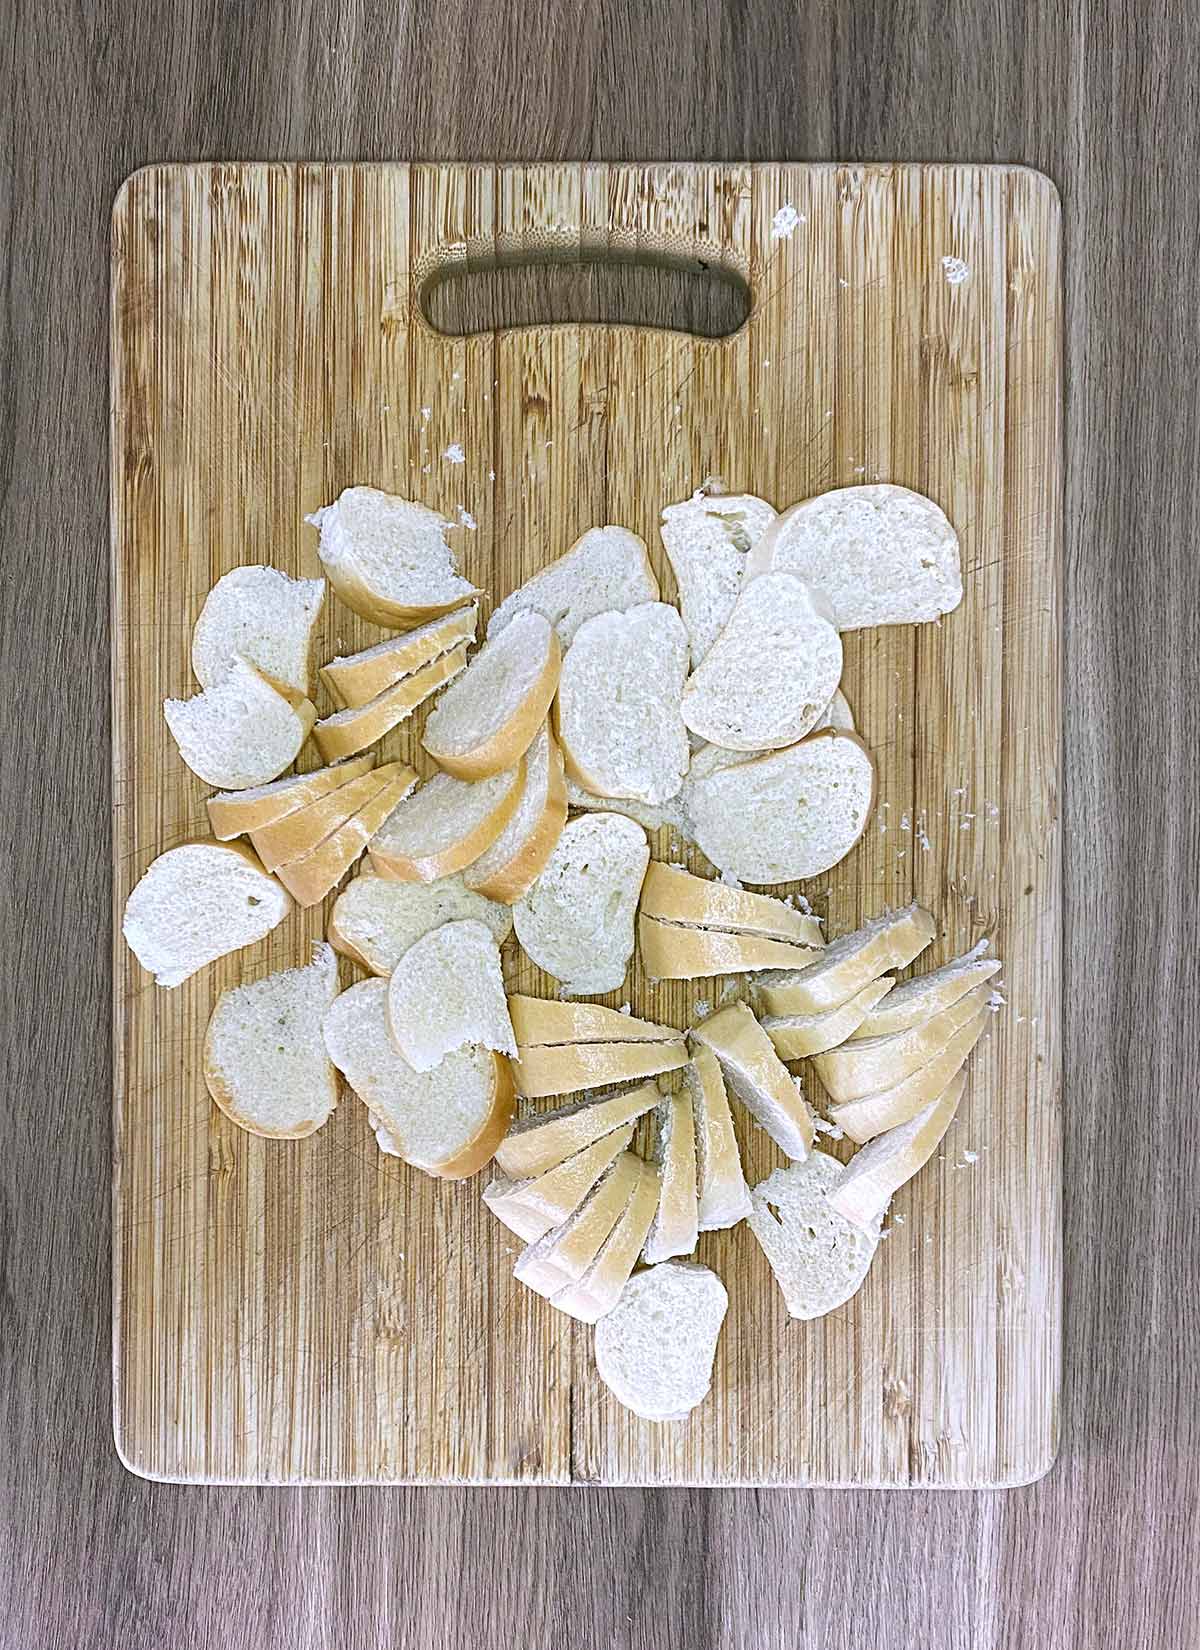 A wooden chopping board covered in disks of sliced bagel.